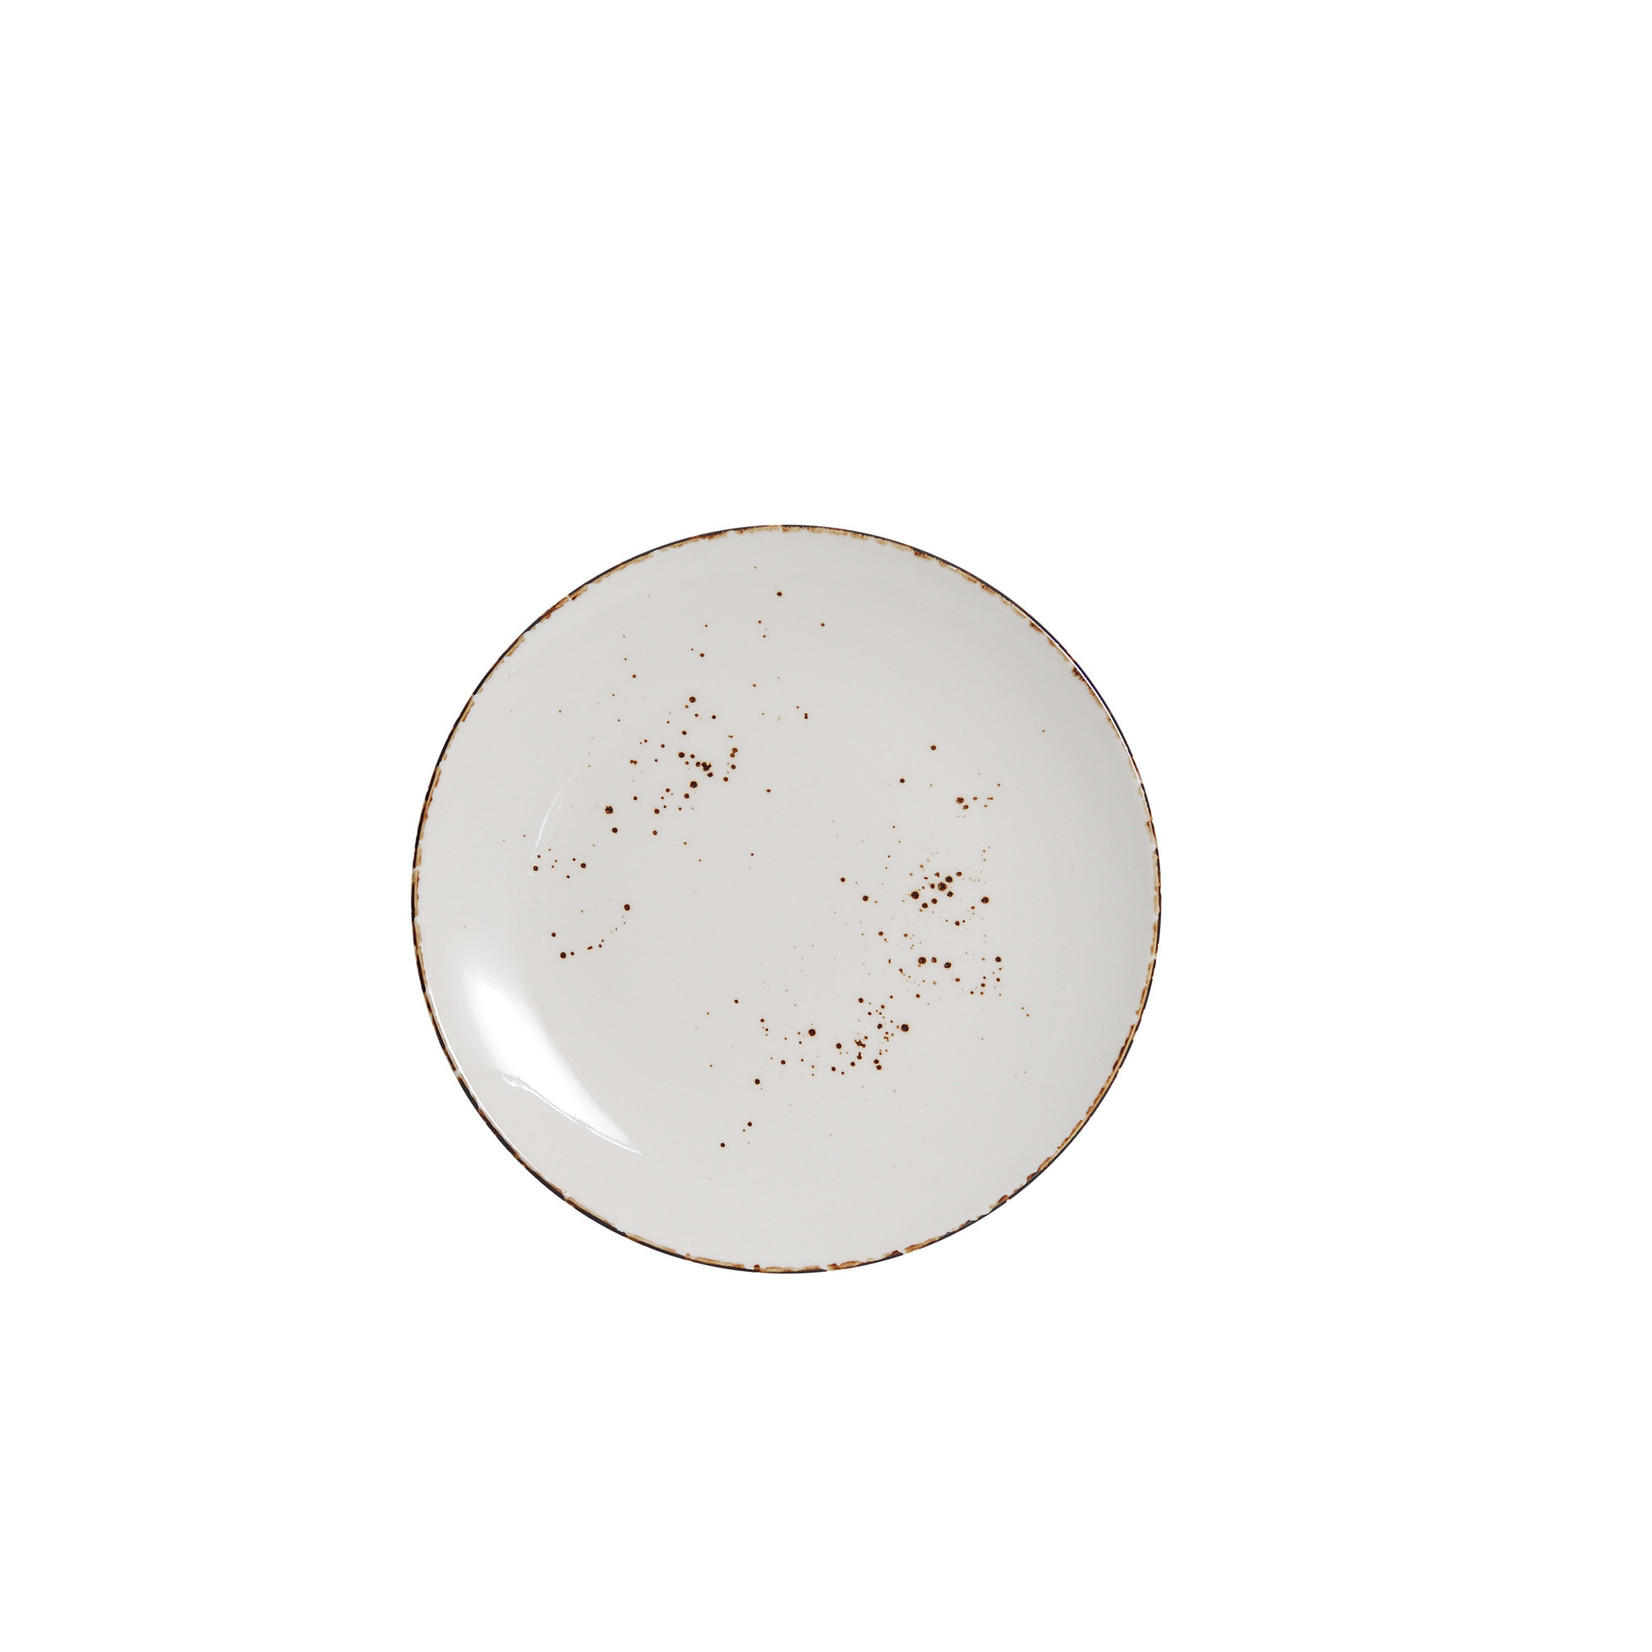 Palate and Plate AW-8748 10.75” coupe splash white 12/cs